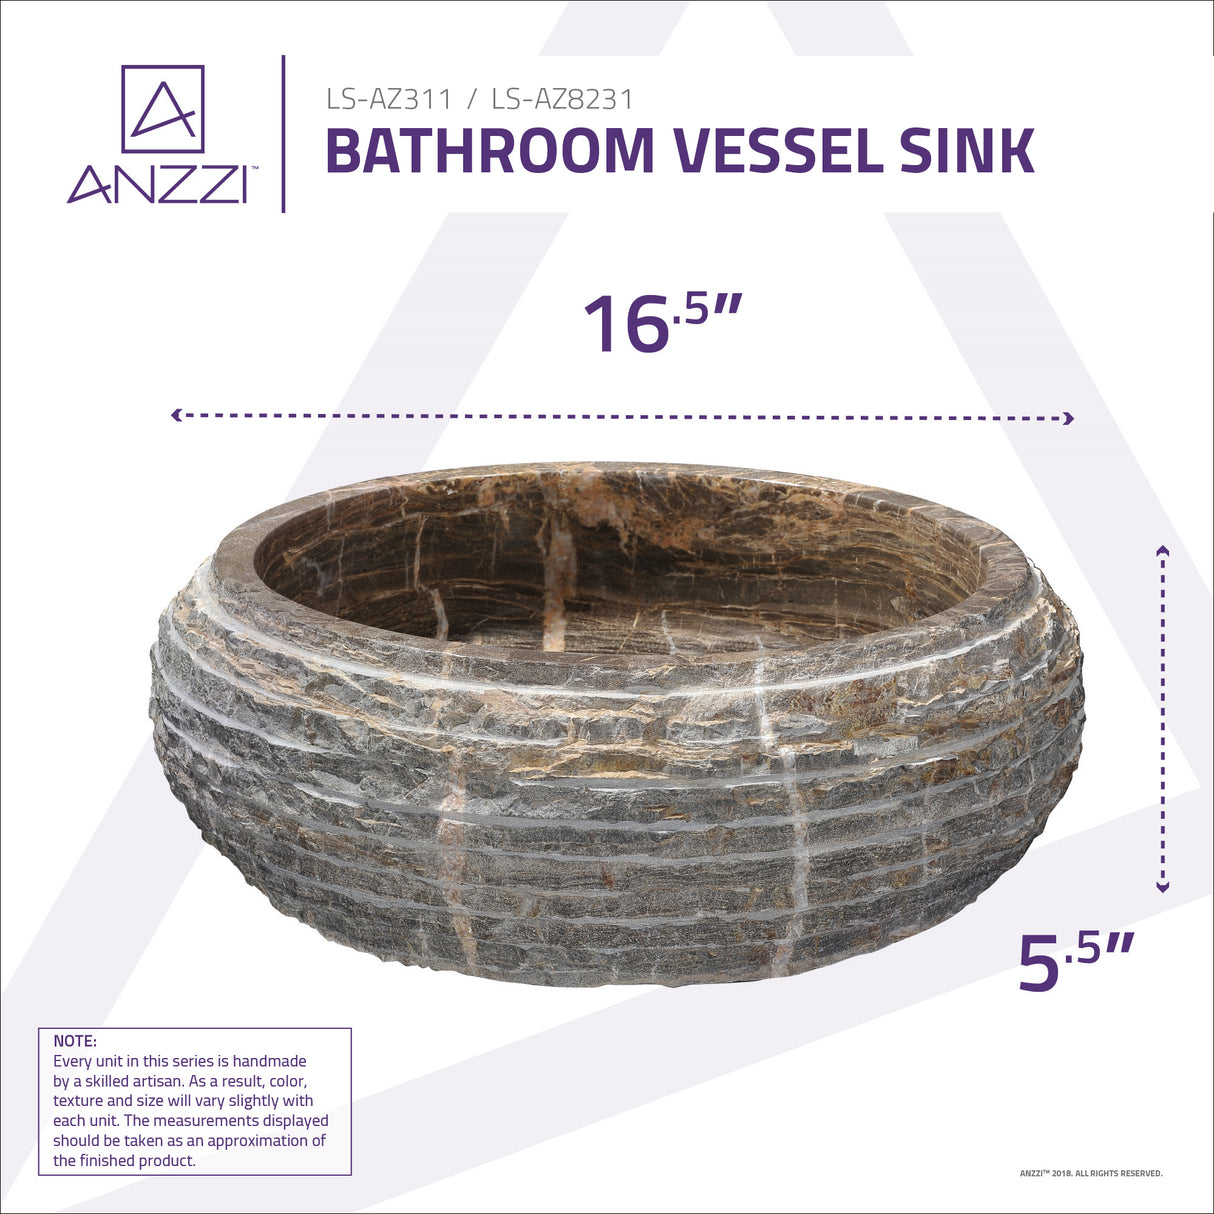 ANZZI LS-AZ8311-2H Mirage Ash Natural Stone Vessel Sink in Coffee Marble